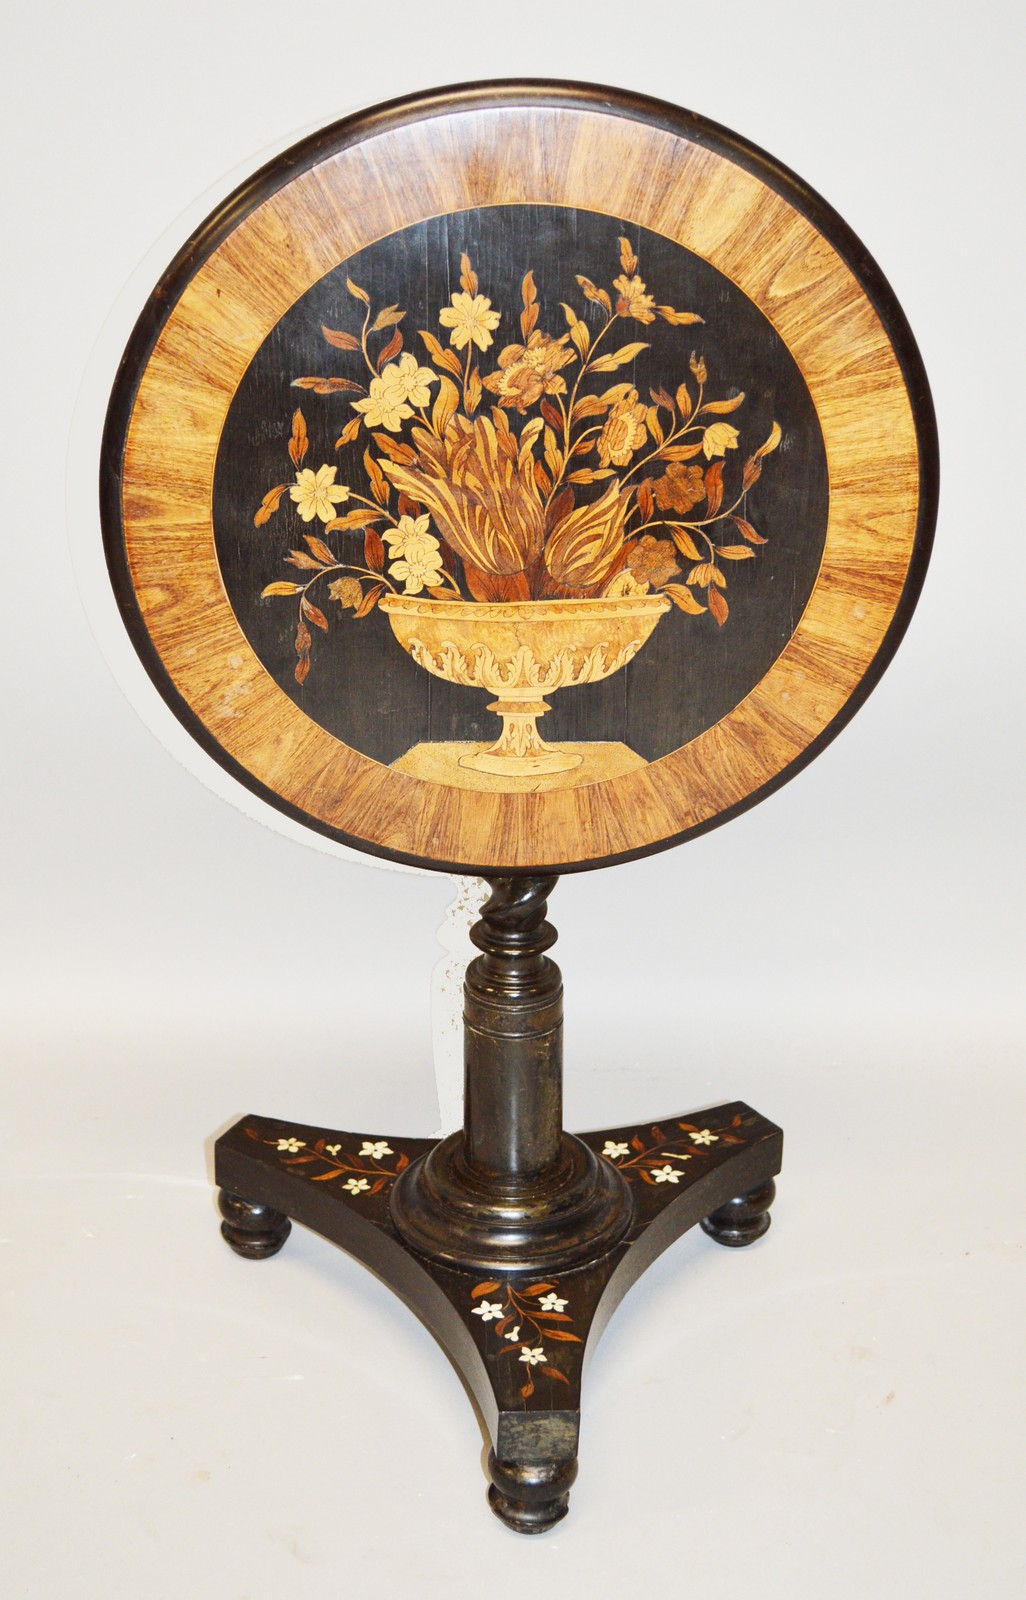 A VERY GOOD EARLY 19TH CENTURY INLAID TABLE with circular top, inlaid with ivory and coloured